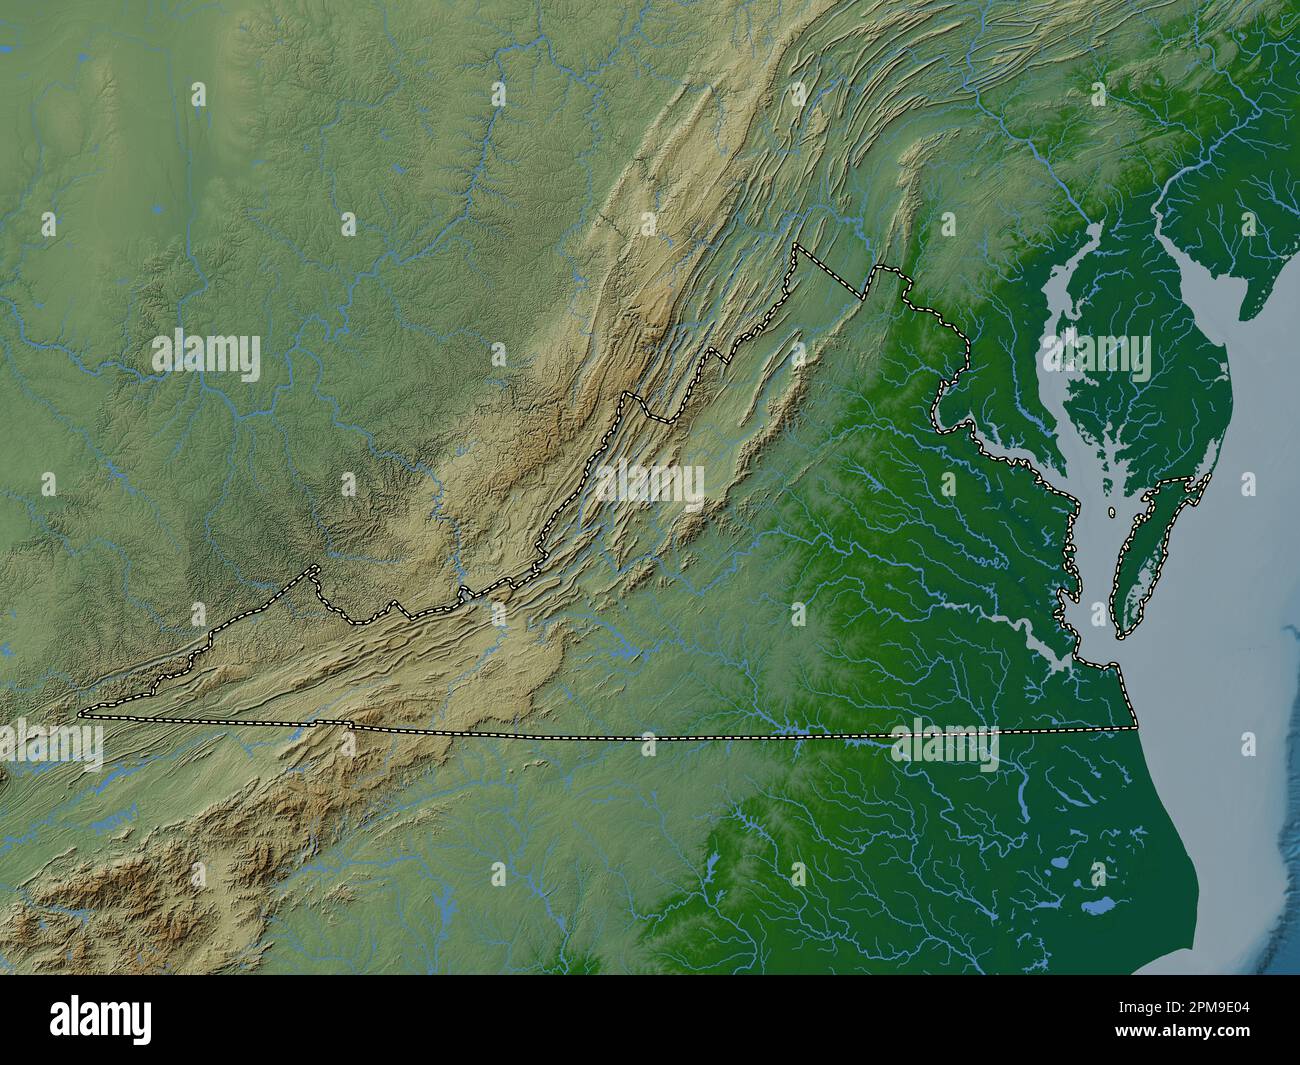 Virginia, state of United States of America. Colored elevation map with lakes and rivers Stock Photo